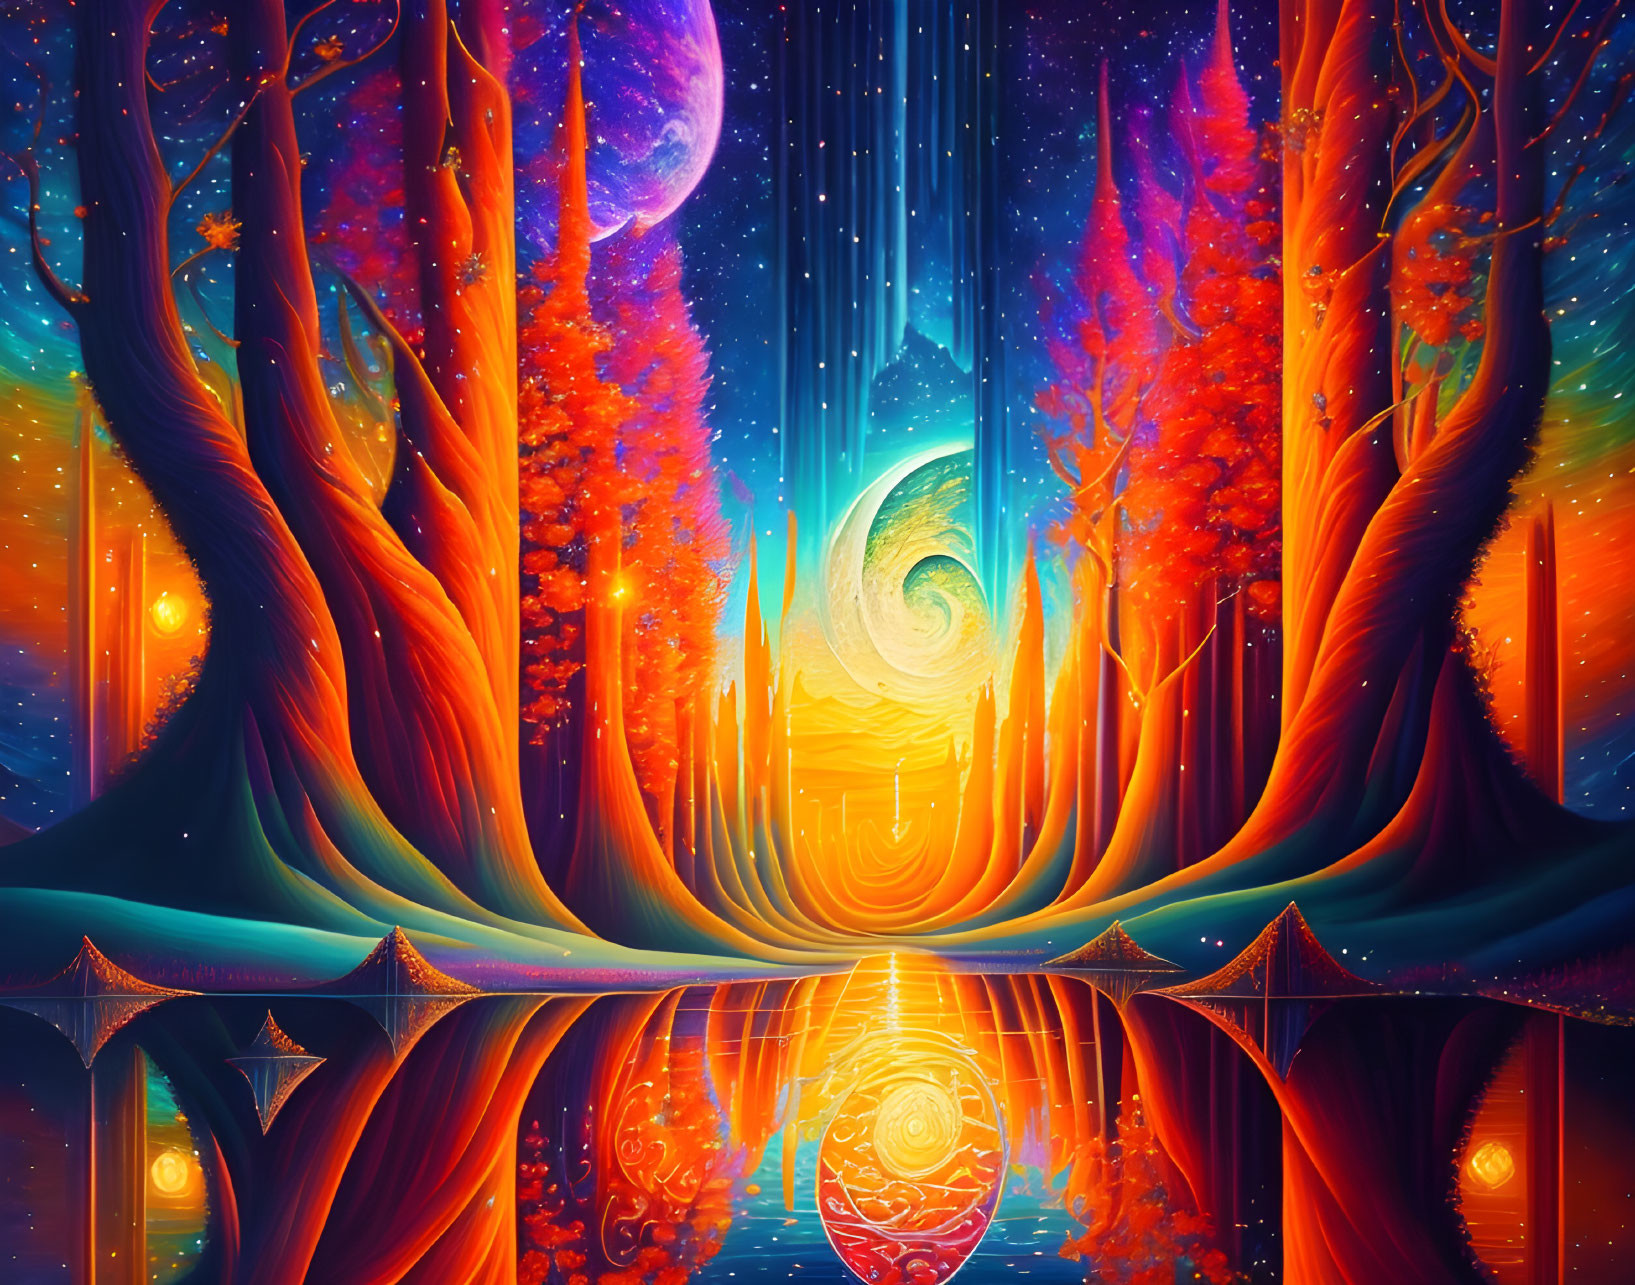 Colorful Fantasy Landscape with Vibrant Trees & Celestial Bodies